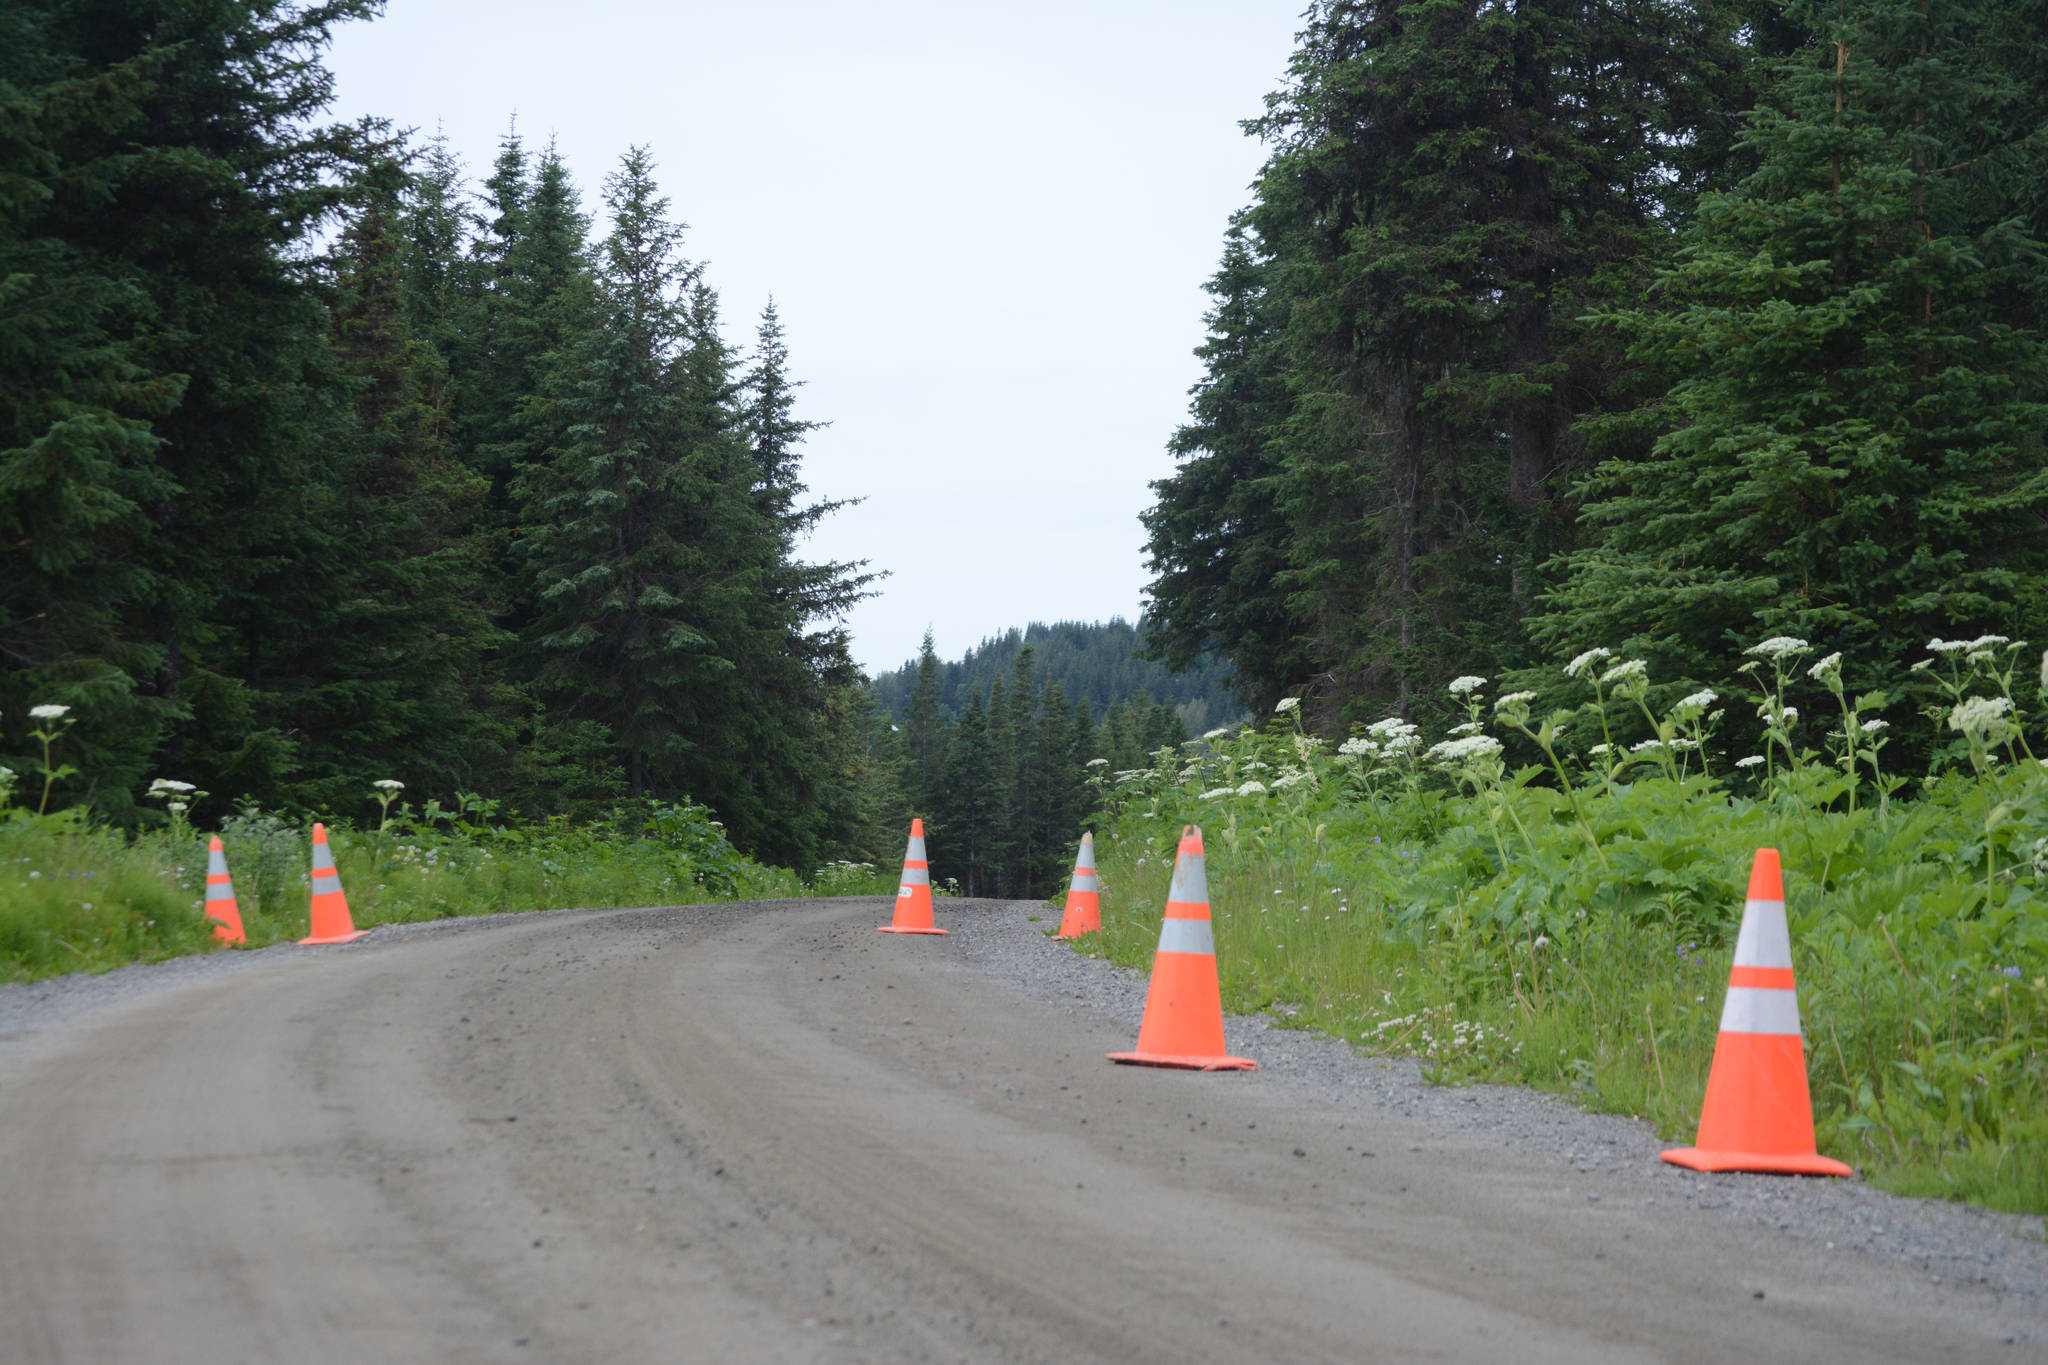 Cones on Dorothy Drive mark the area where neighbors at the end of the rural road plan to vacate the last 2,000 feet and turn it into a private, gated road. After this photo was taken on July 9, 2018, builders put in a circular turn around on the road downhill from East Skyline Drive in Homer, Alaska. (Homer News file photo)